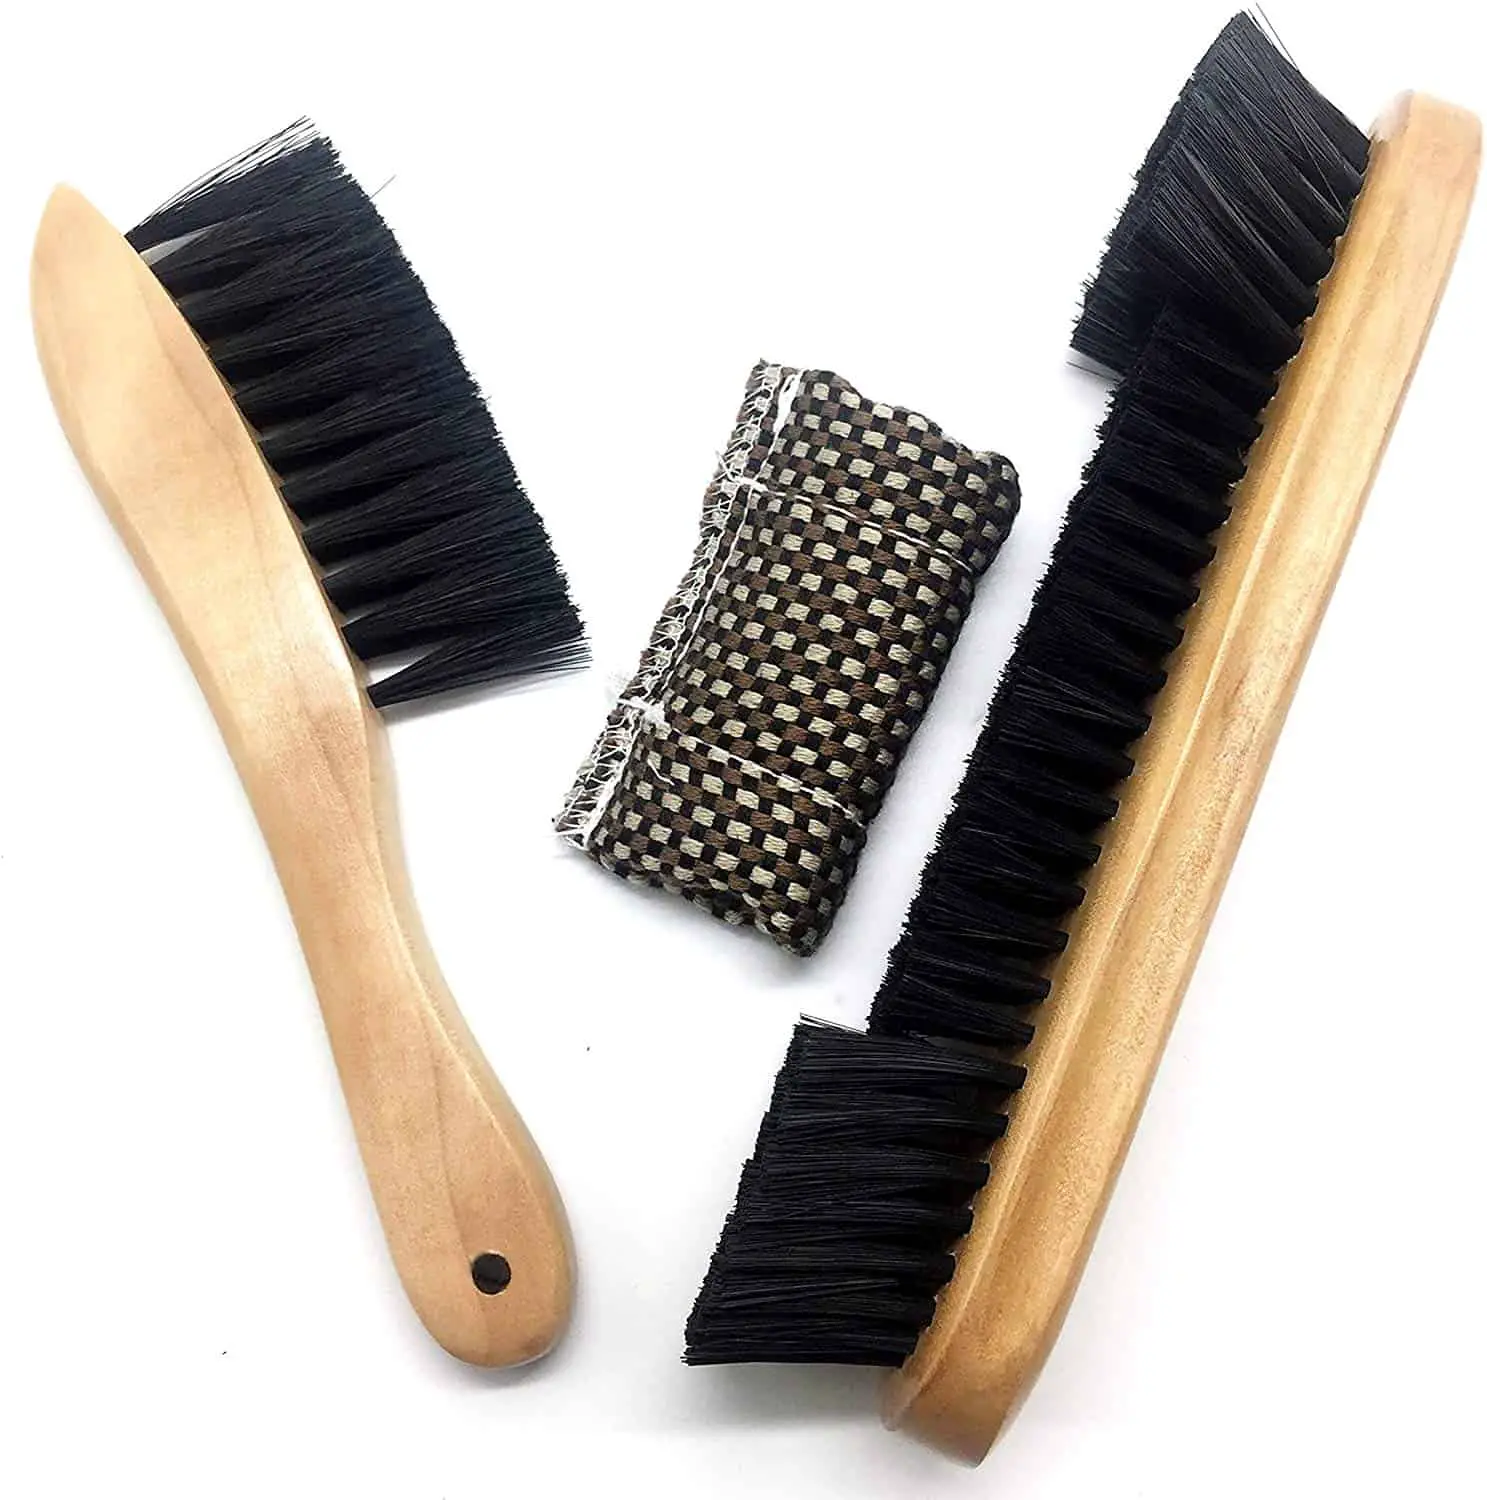 OESS Brush Set with Cloth